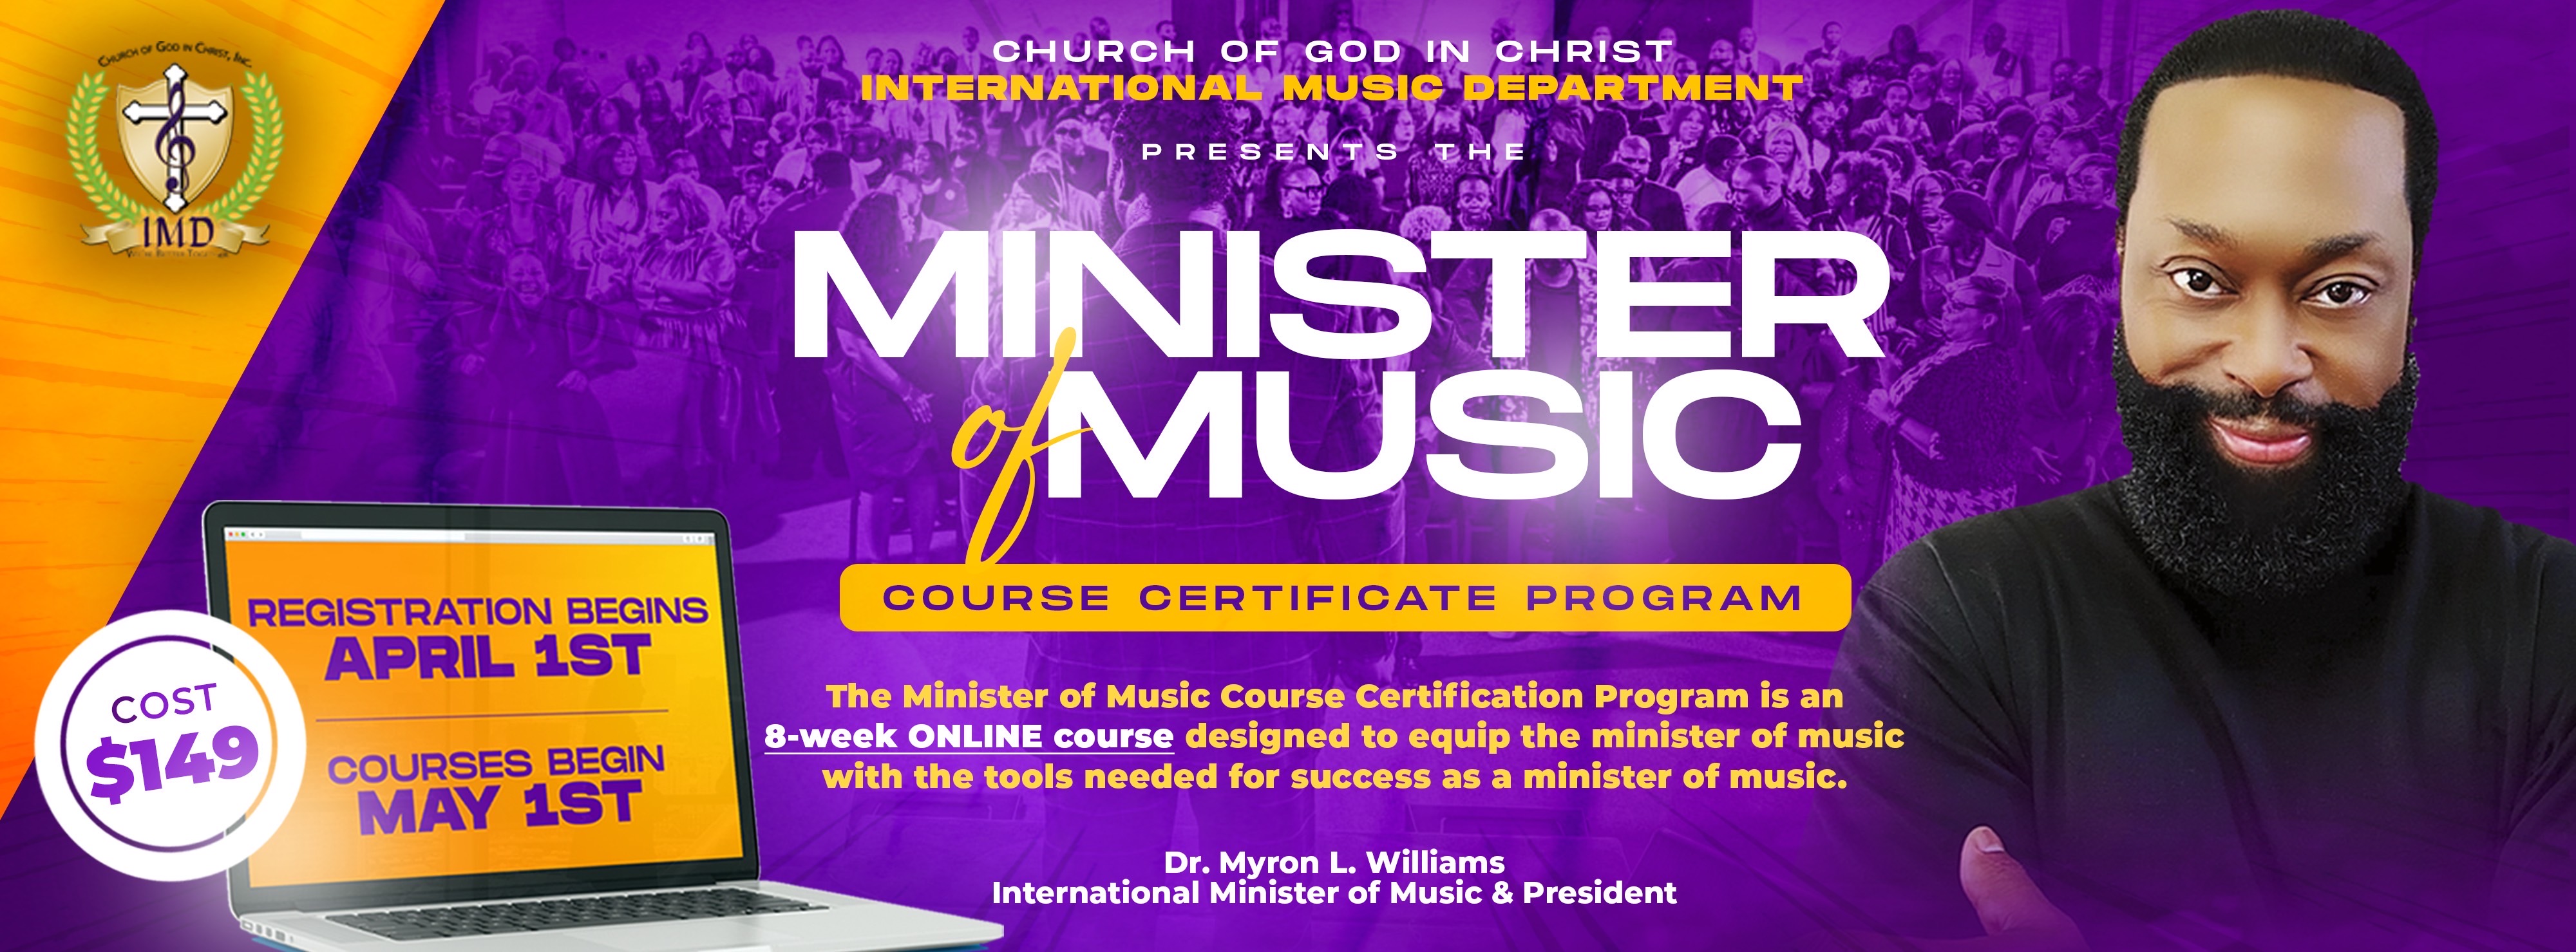 Minister of Music Course Certificate Program 